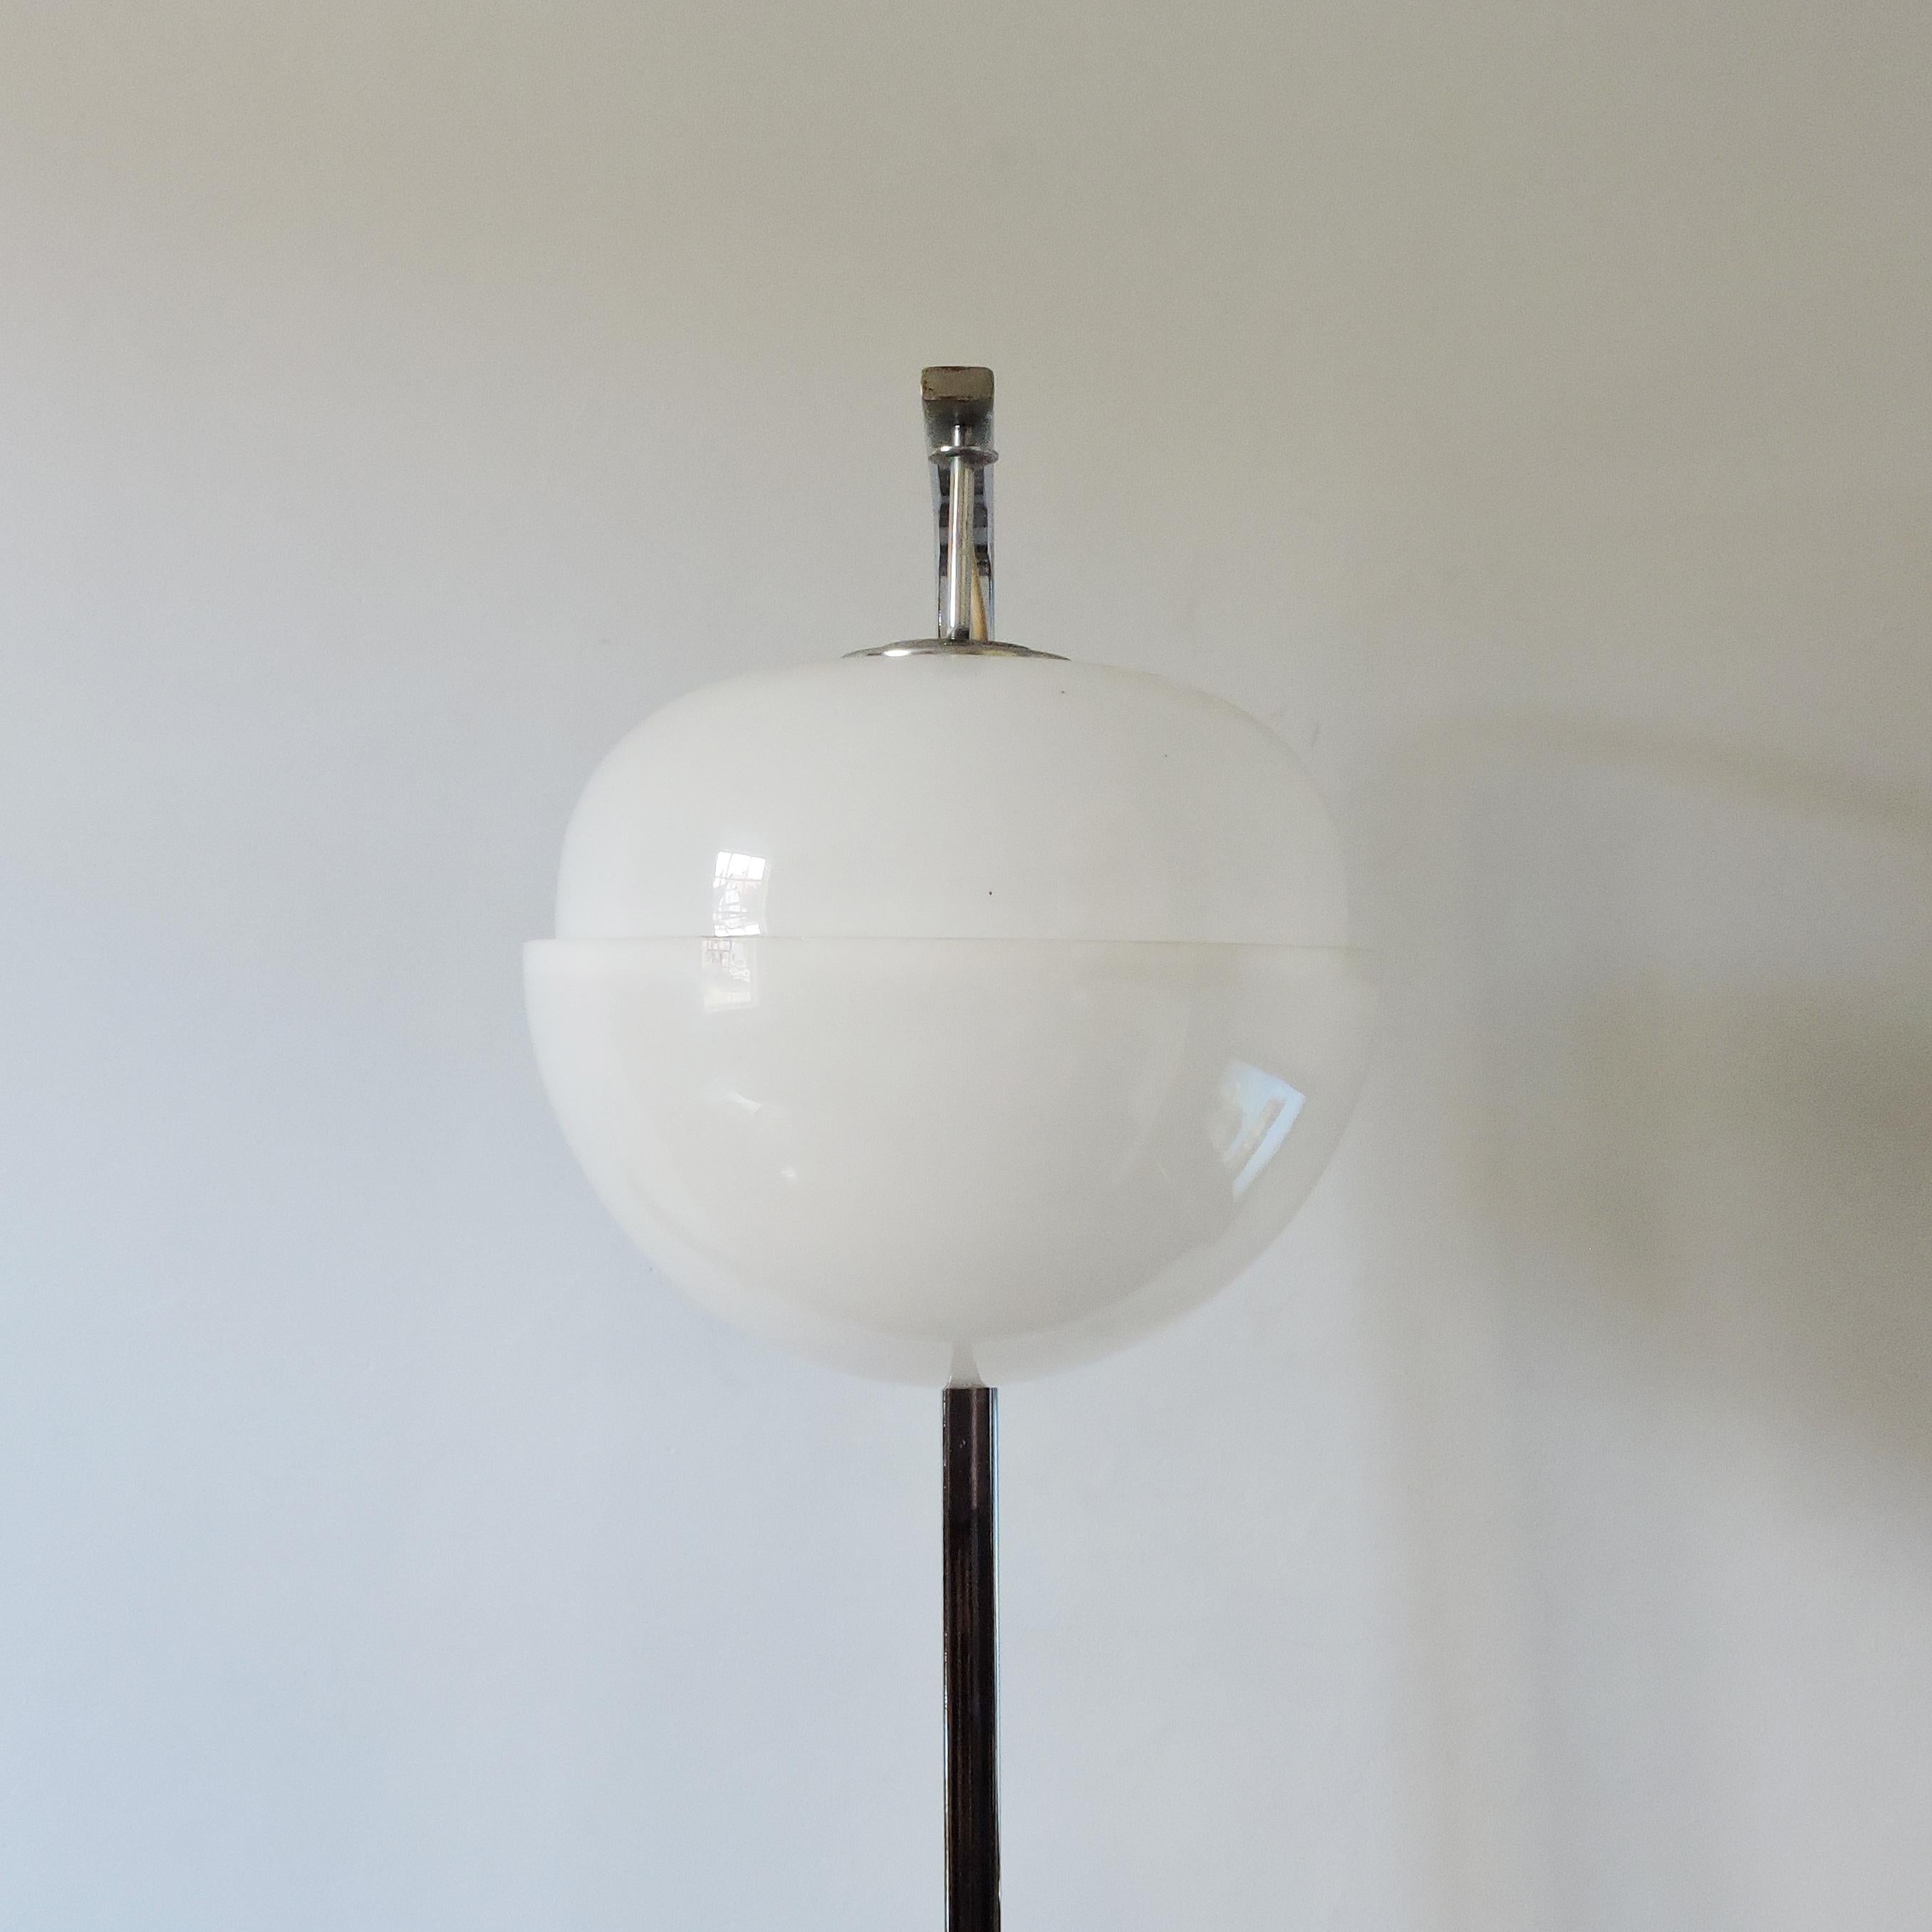 A 1970s tall chrome floor lamp featuring a suspended plastic globe.